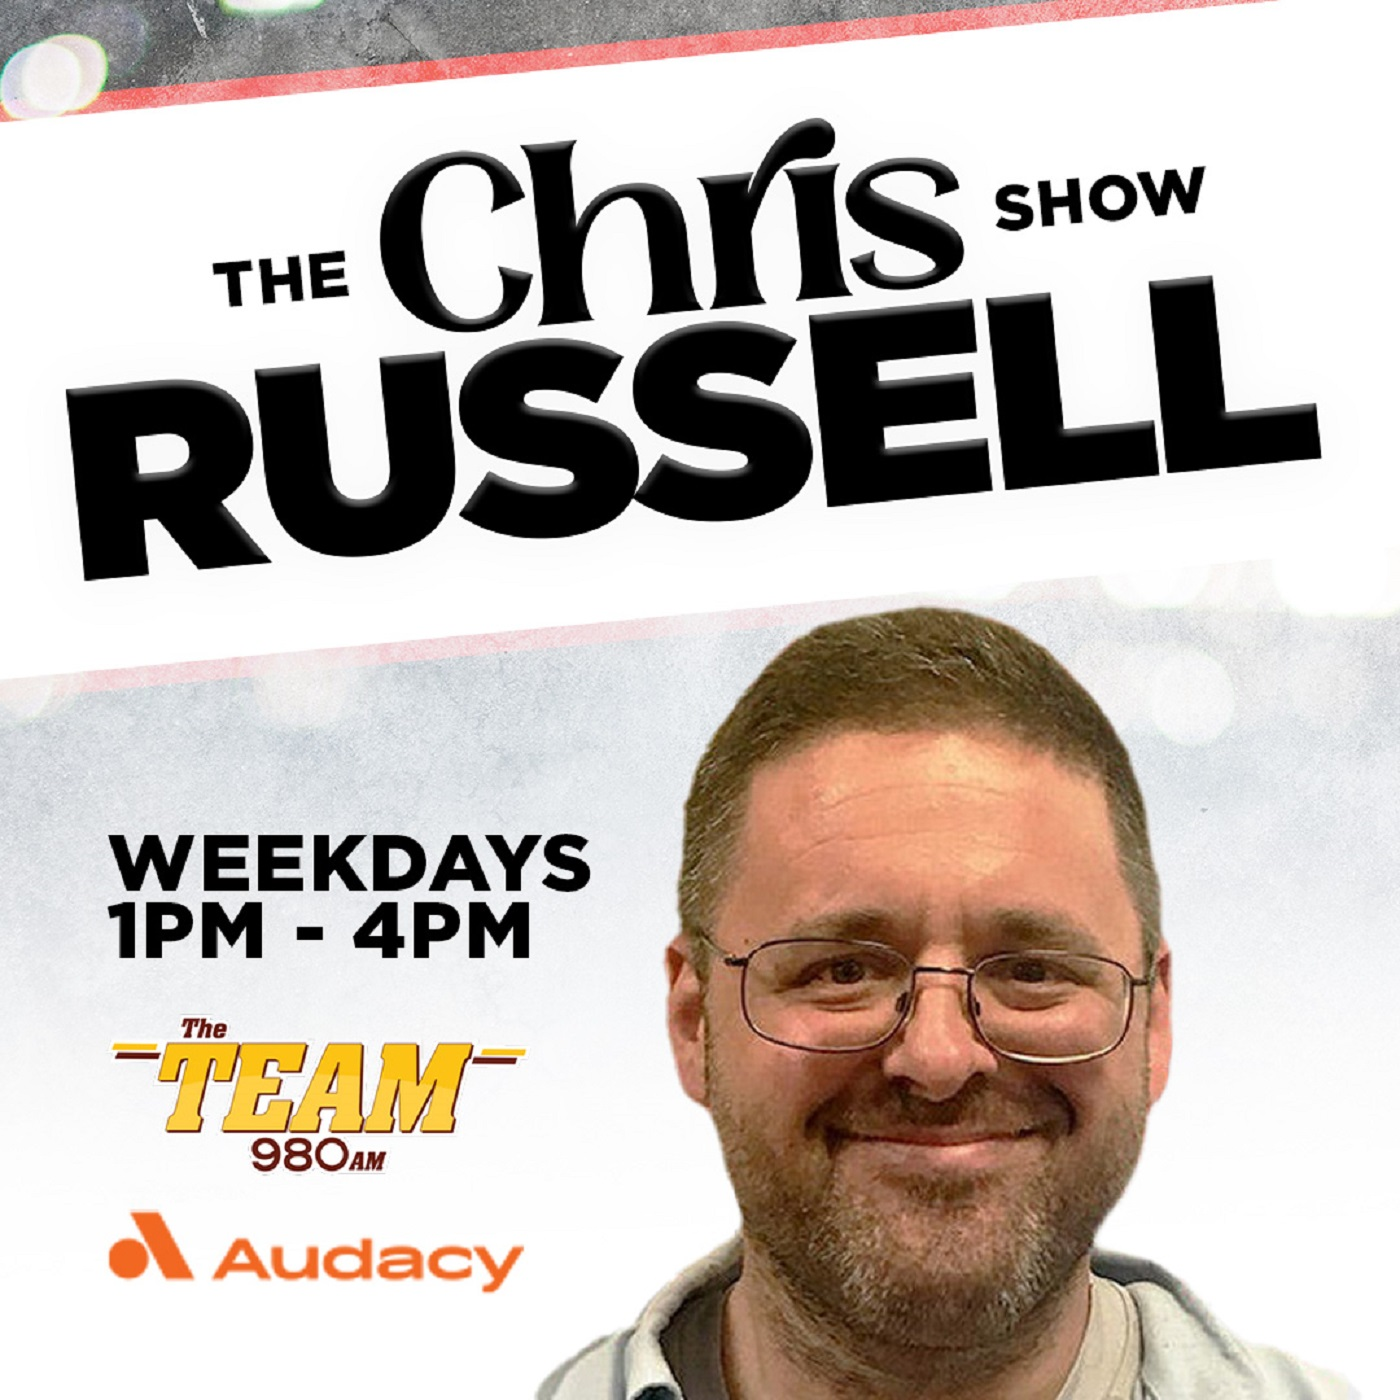 Jim Miller Joins Russell on the Radio